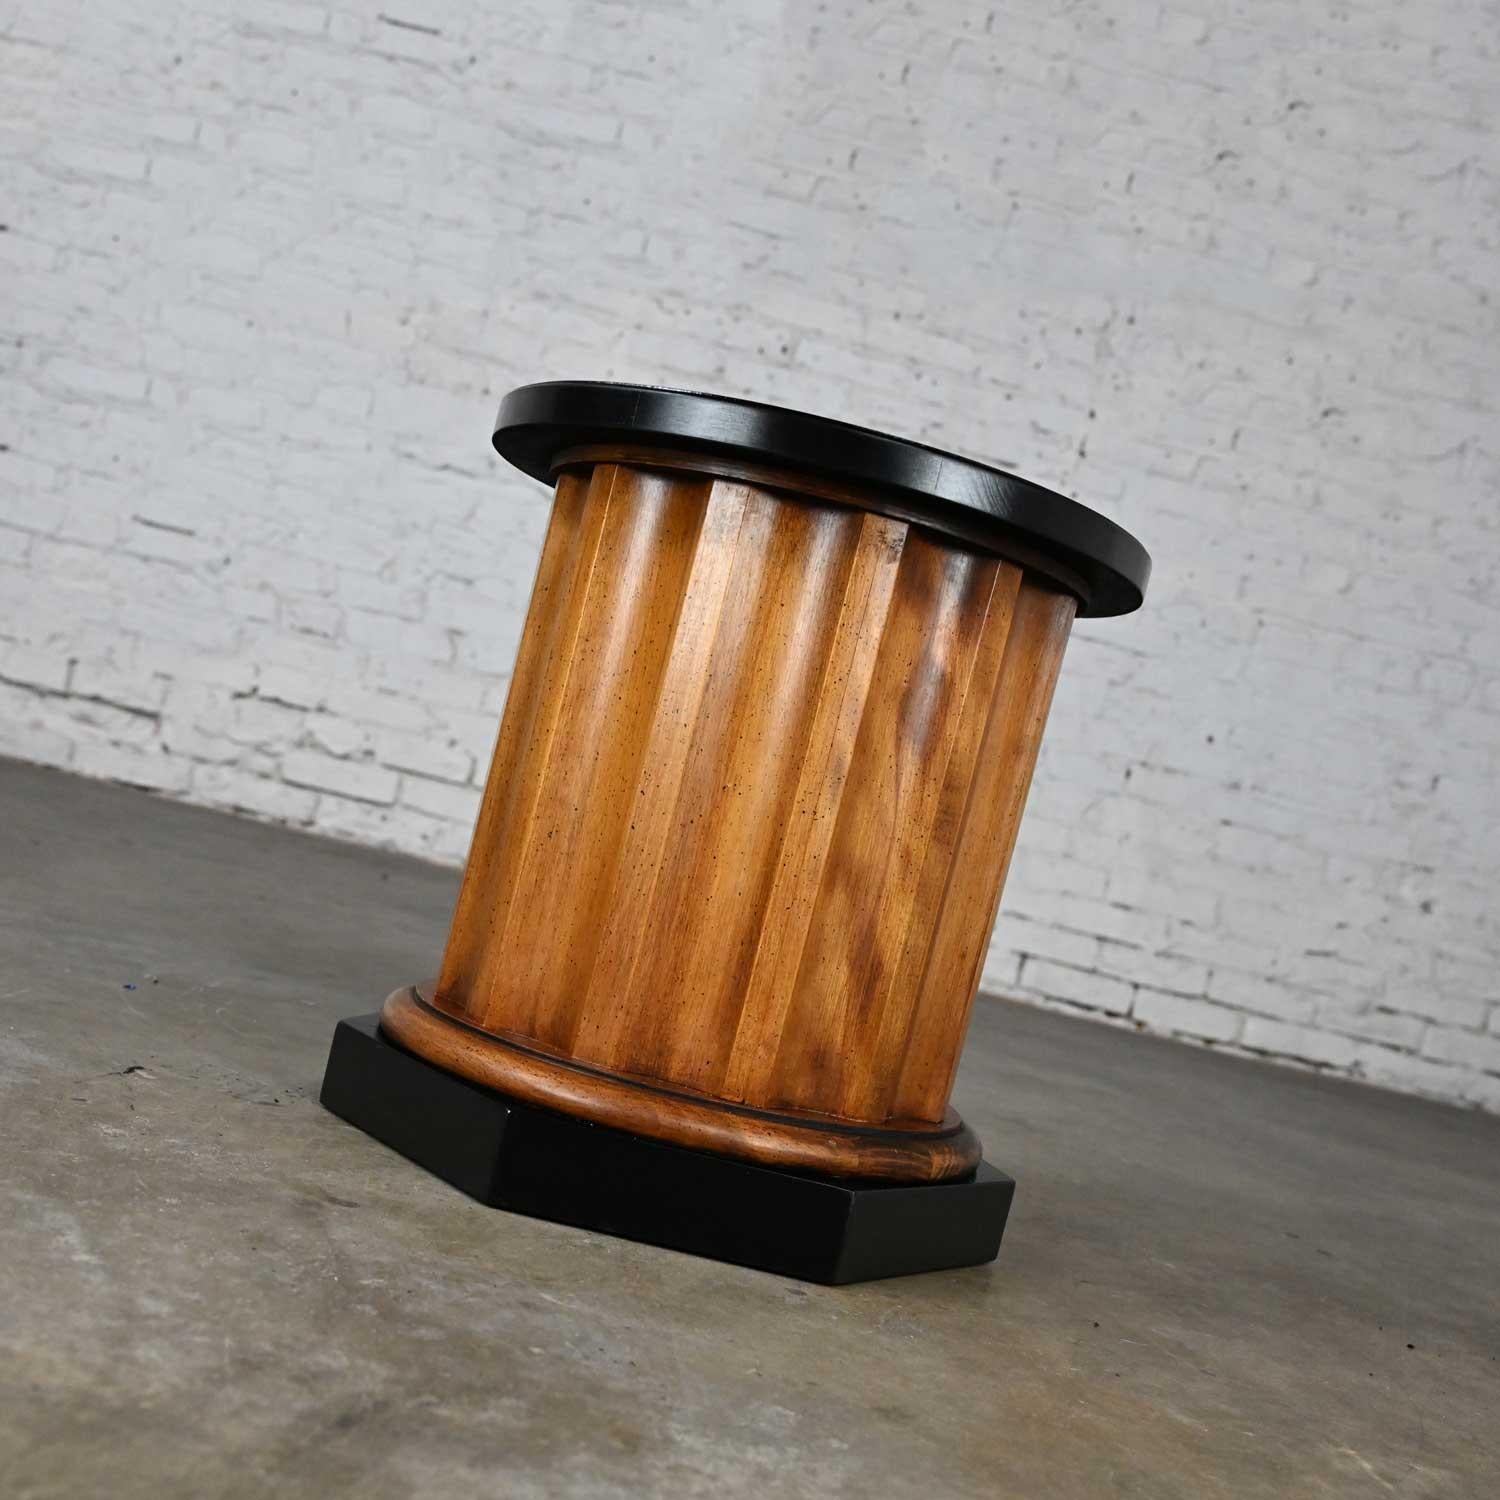 Neoclassical Revival Late 20th Century Neoclassic Revival Walnut Toned Wood & Black Column End Table For Sale